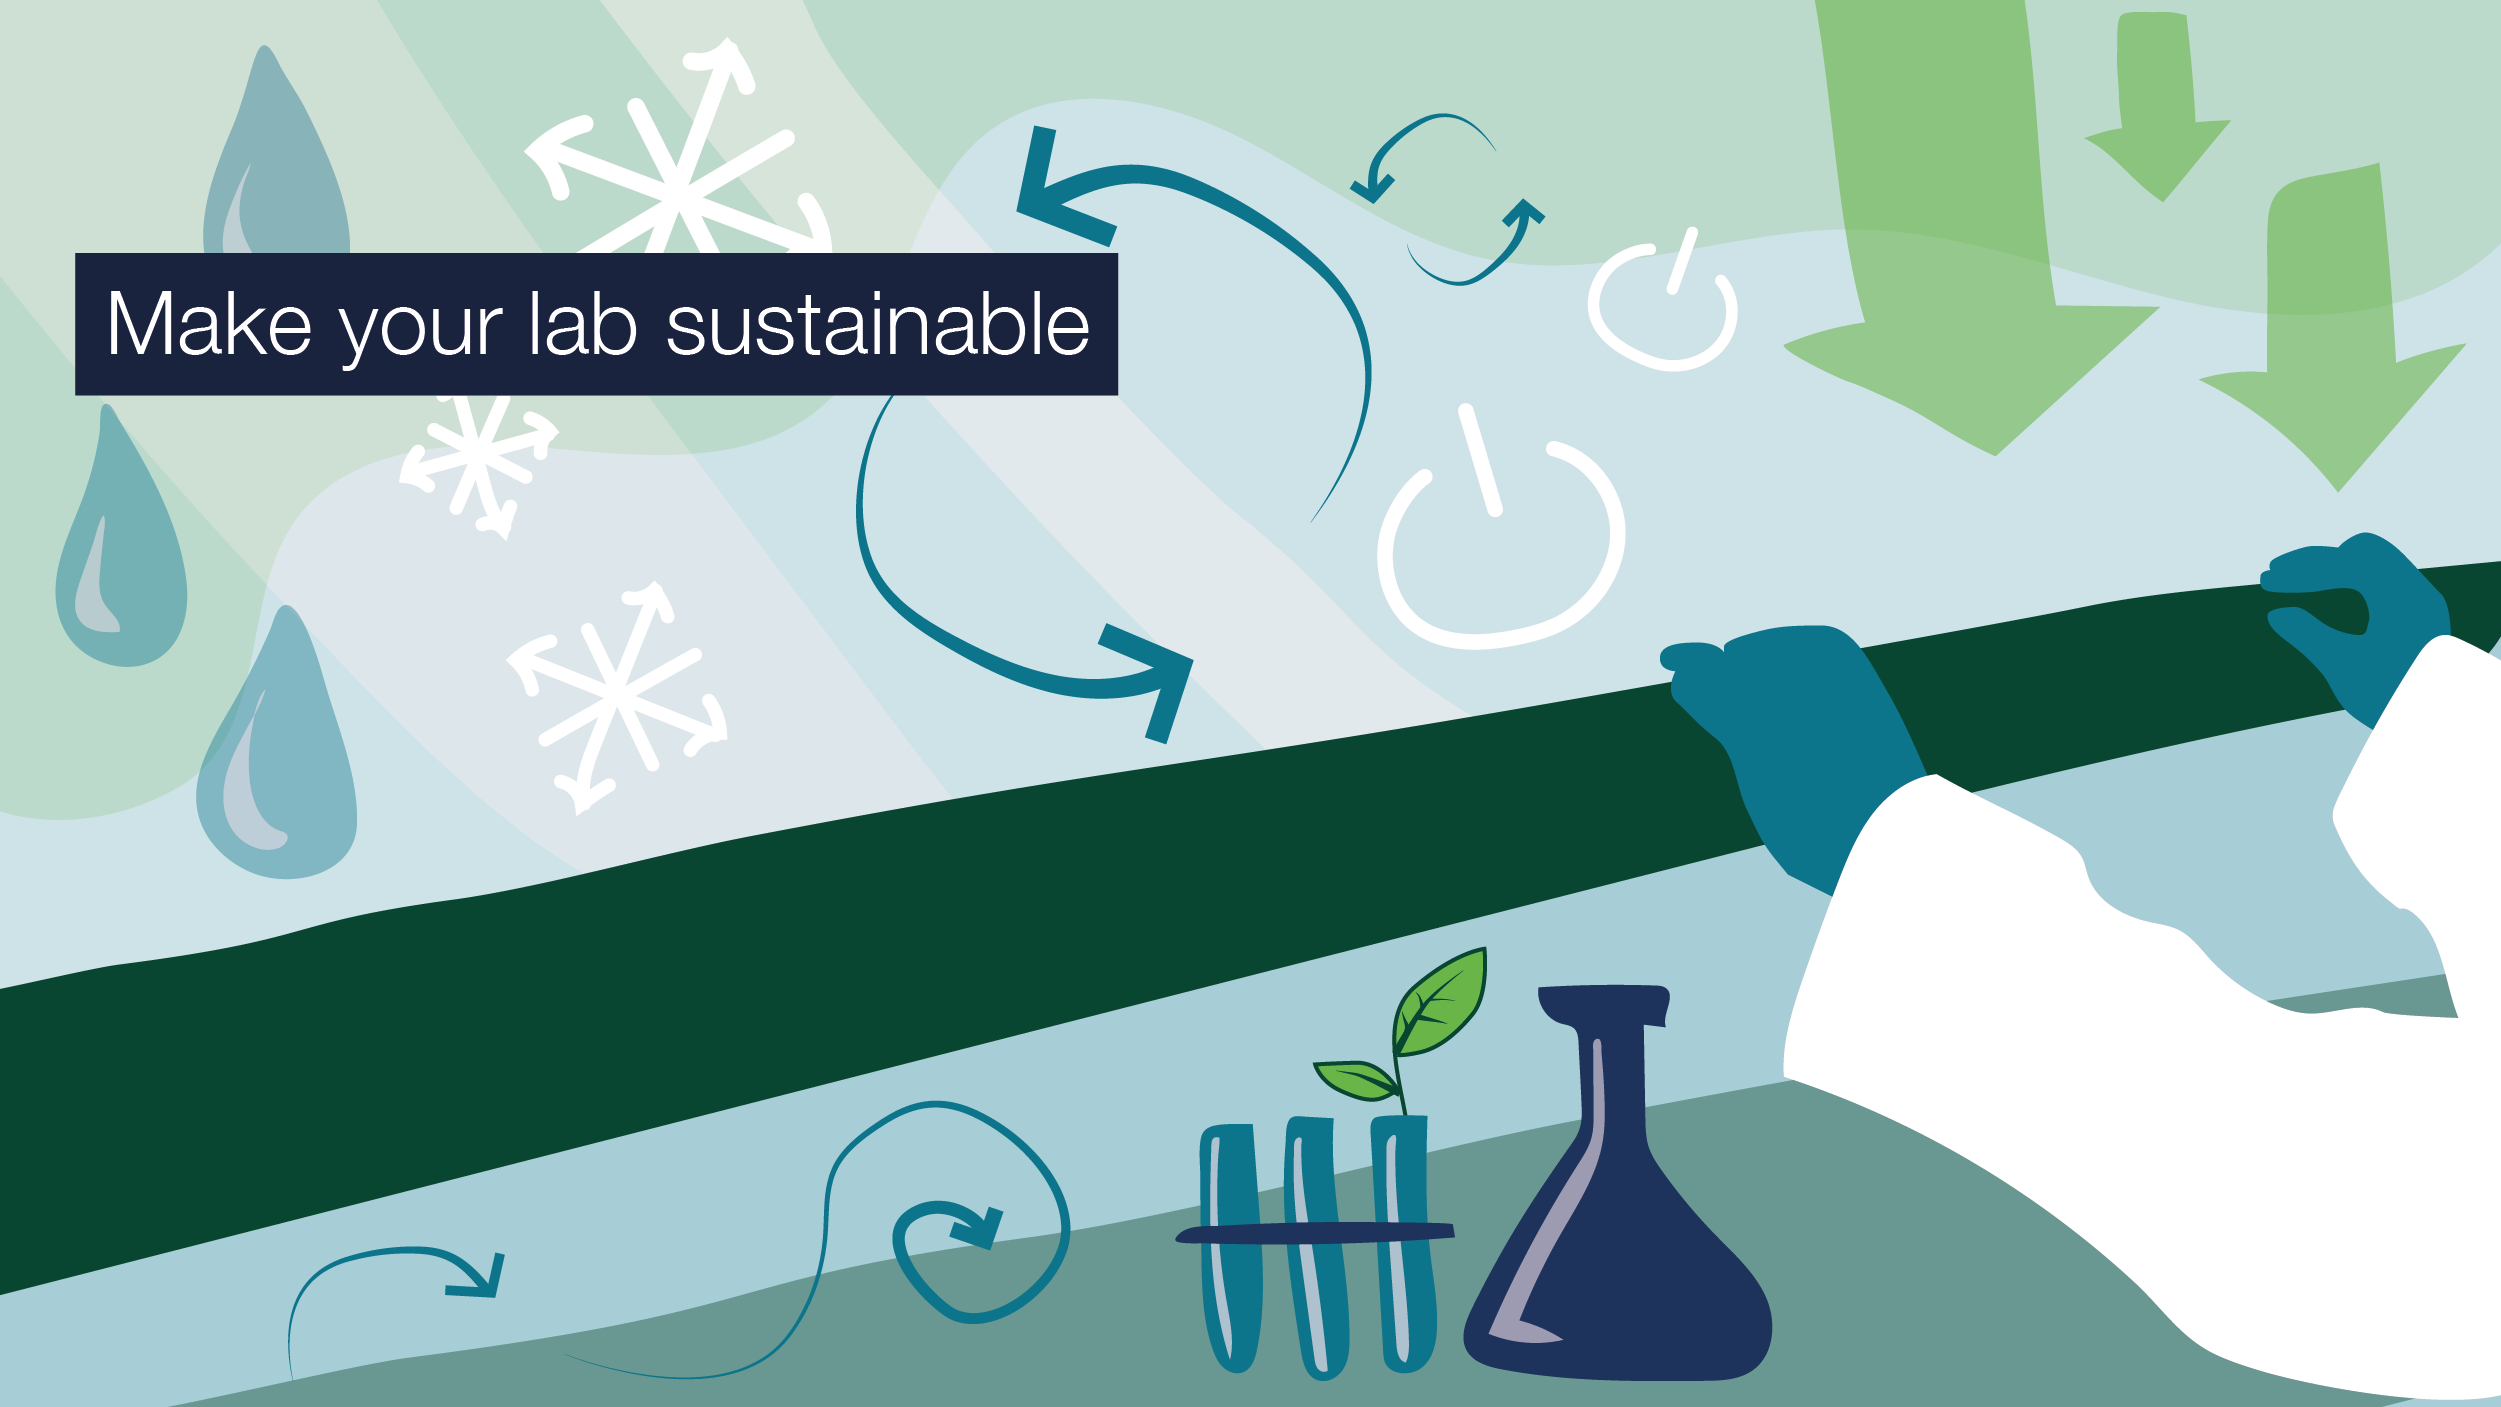 Make your lab sustainable_Twitter image.png